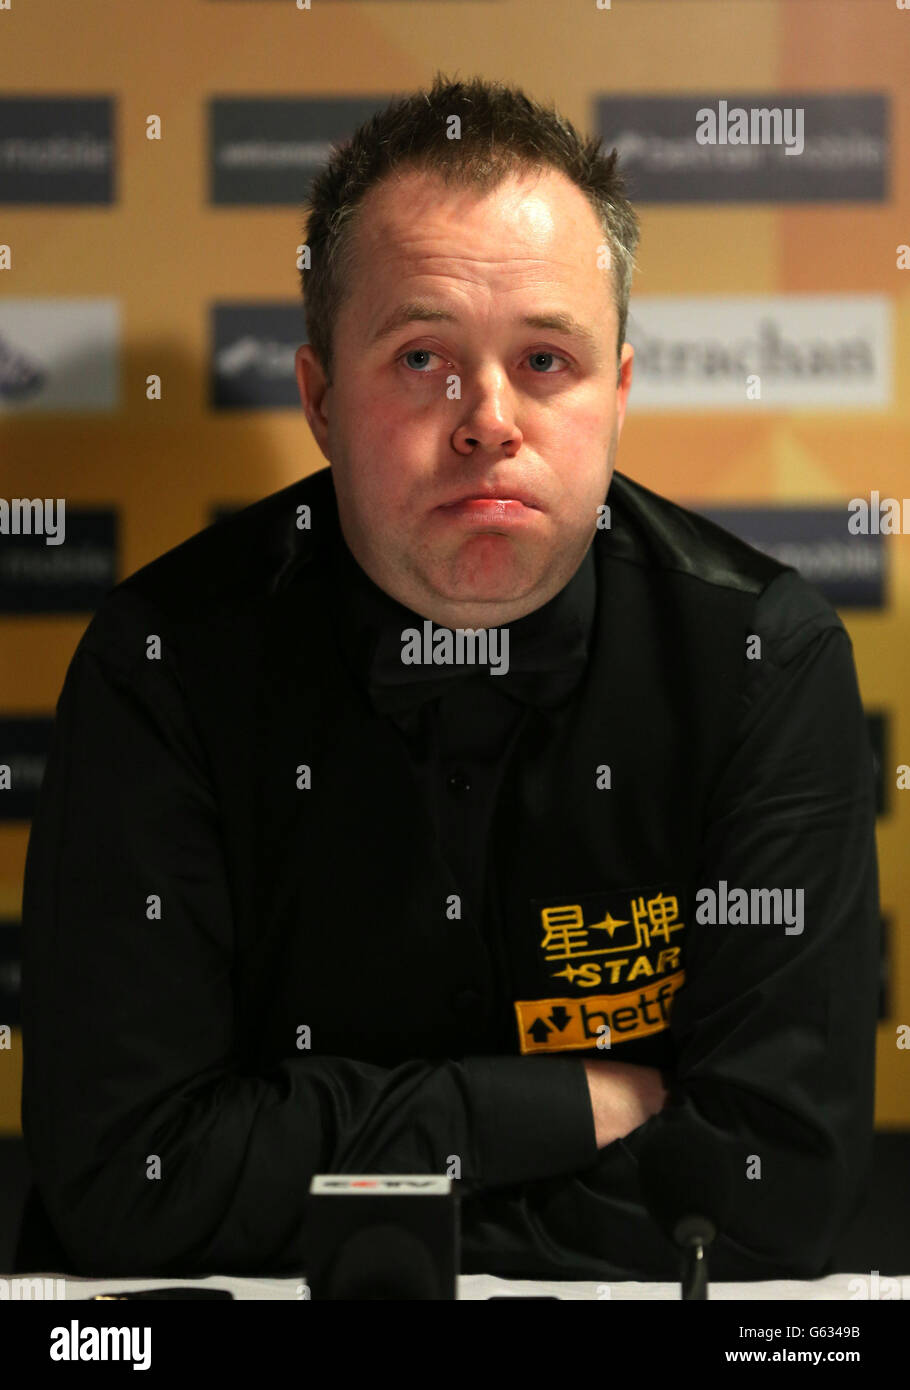 Scotland's John Higgins speaks to the media after his first round match defeat 10.6 against England's Mark Davis, in the Betfair World Championships at the Crucible, Sheffield. Stock Photo